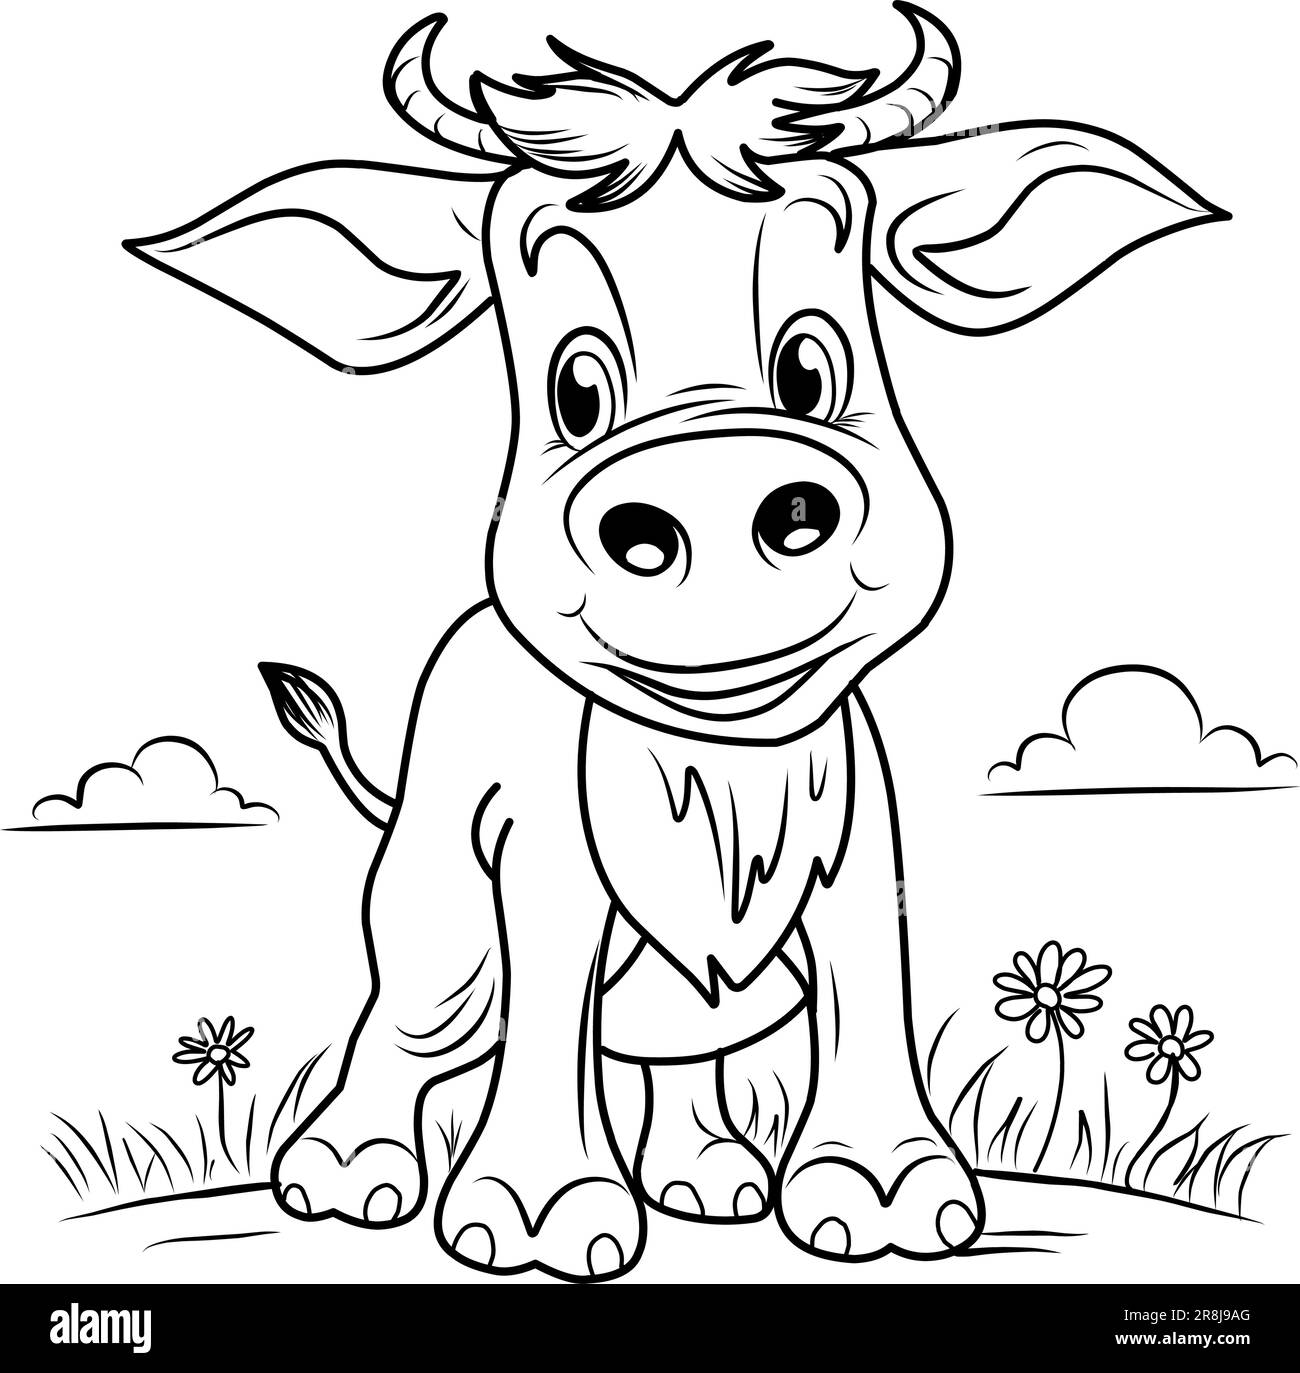 Coloring page of a cow calf cute funny character linear illustration childrens for coloringcow farm stock vector image art